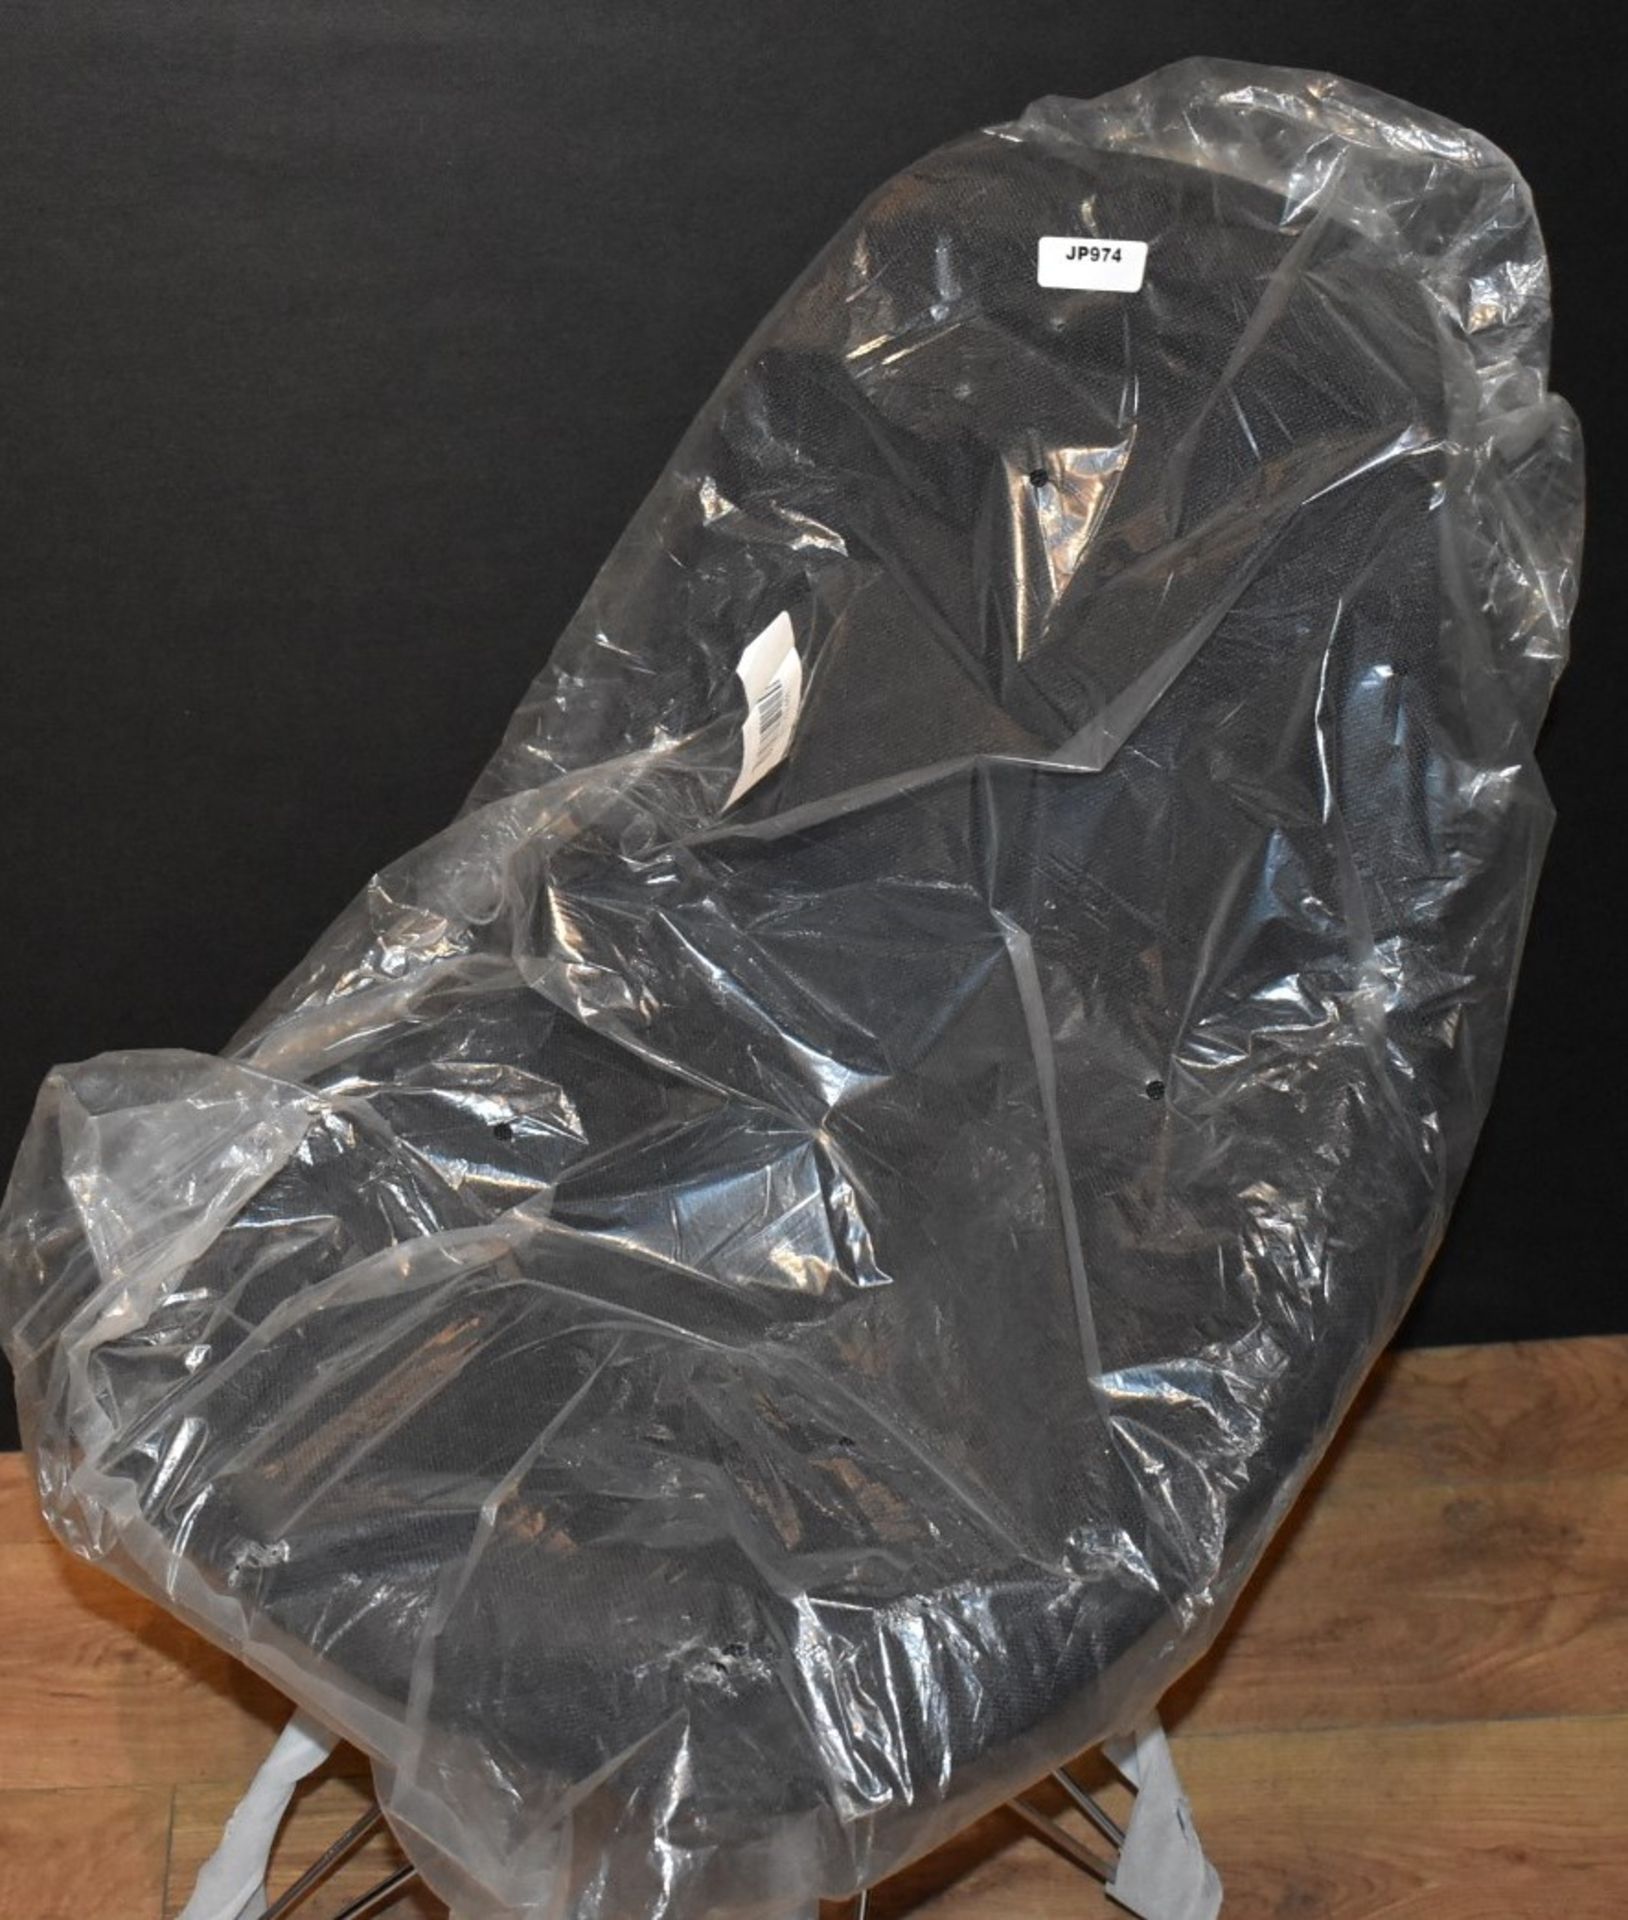 6 x Eames Inspired Eiffel Dining Chairs - Charcoal Fabric Seats With Chrome Bases - New and Unused - - Image 4 of 6